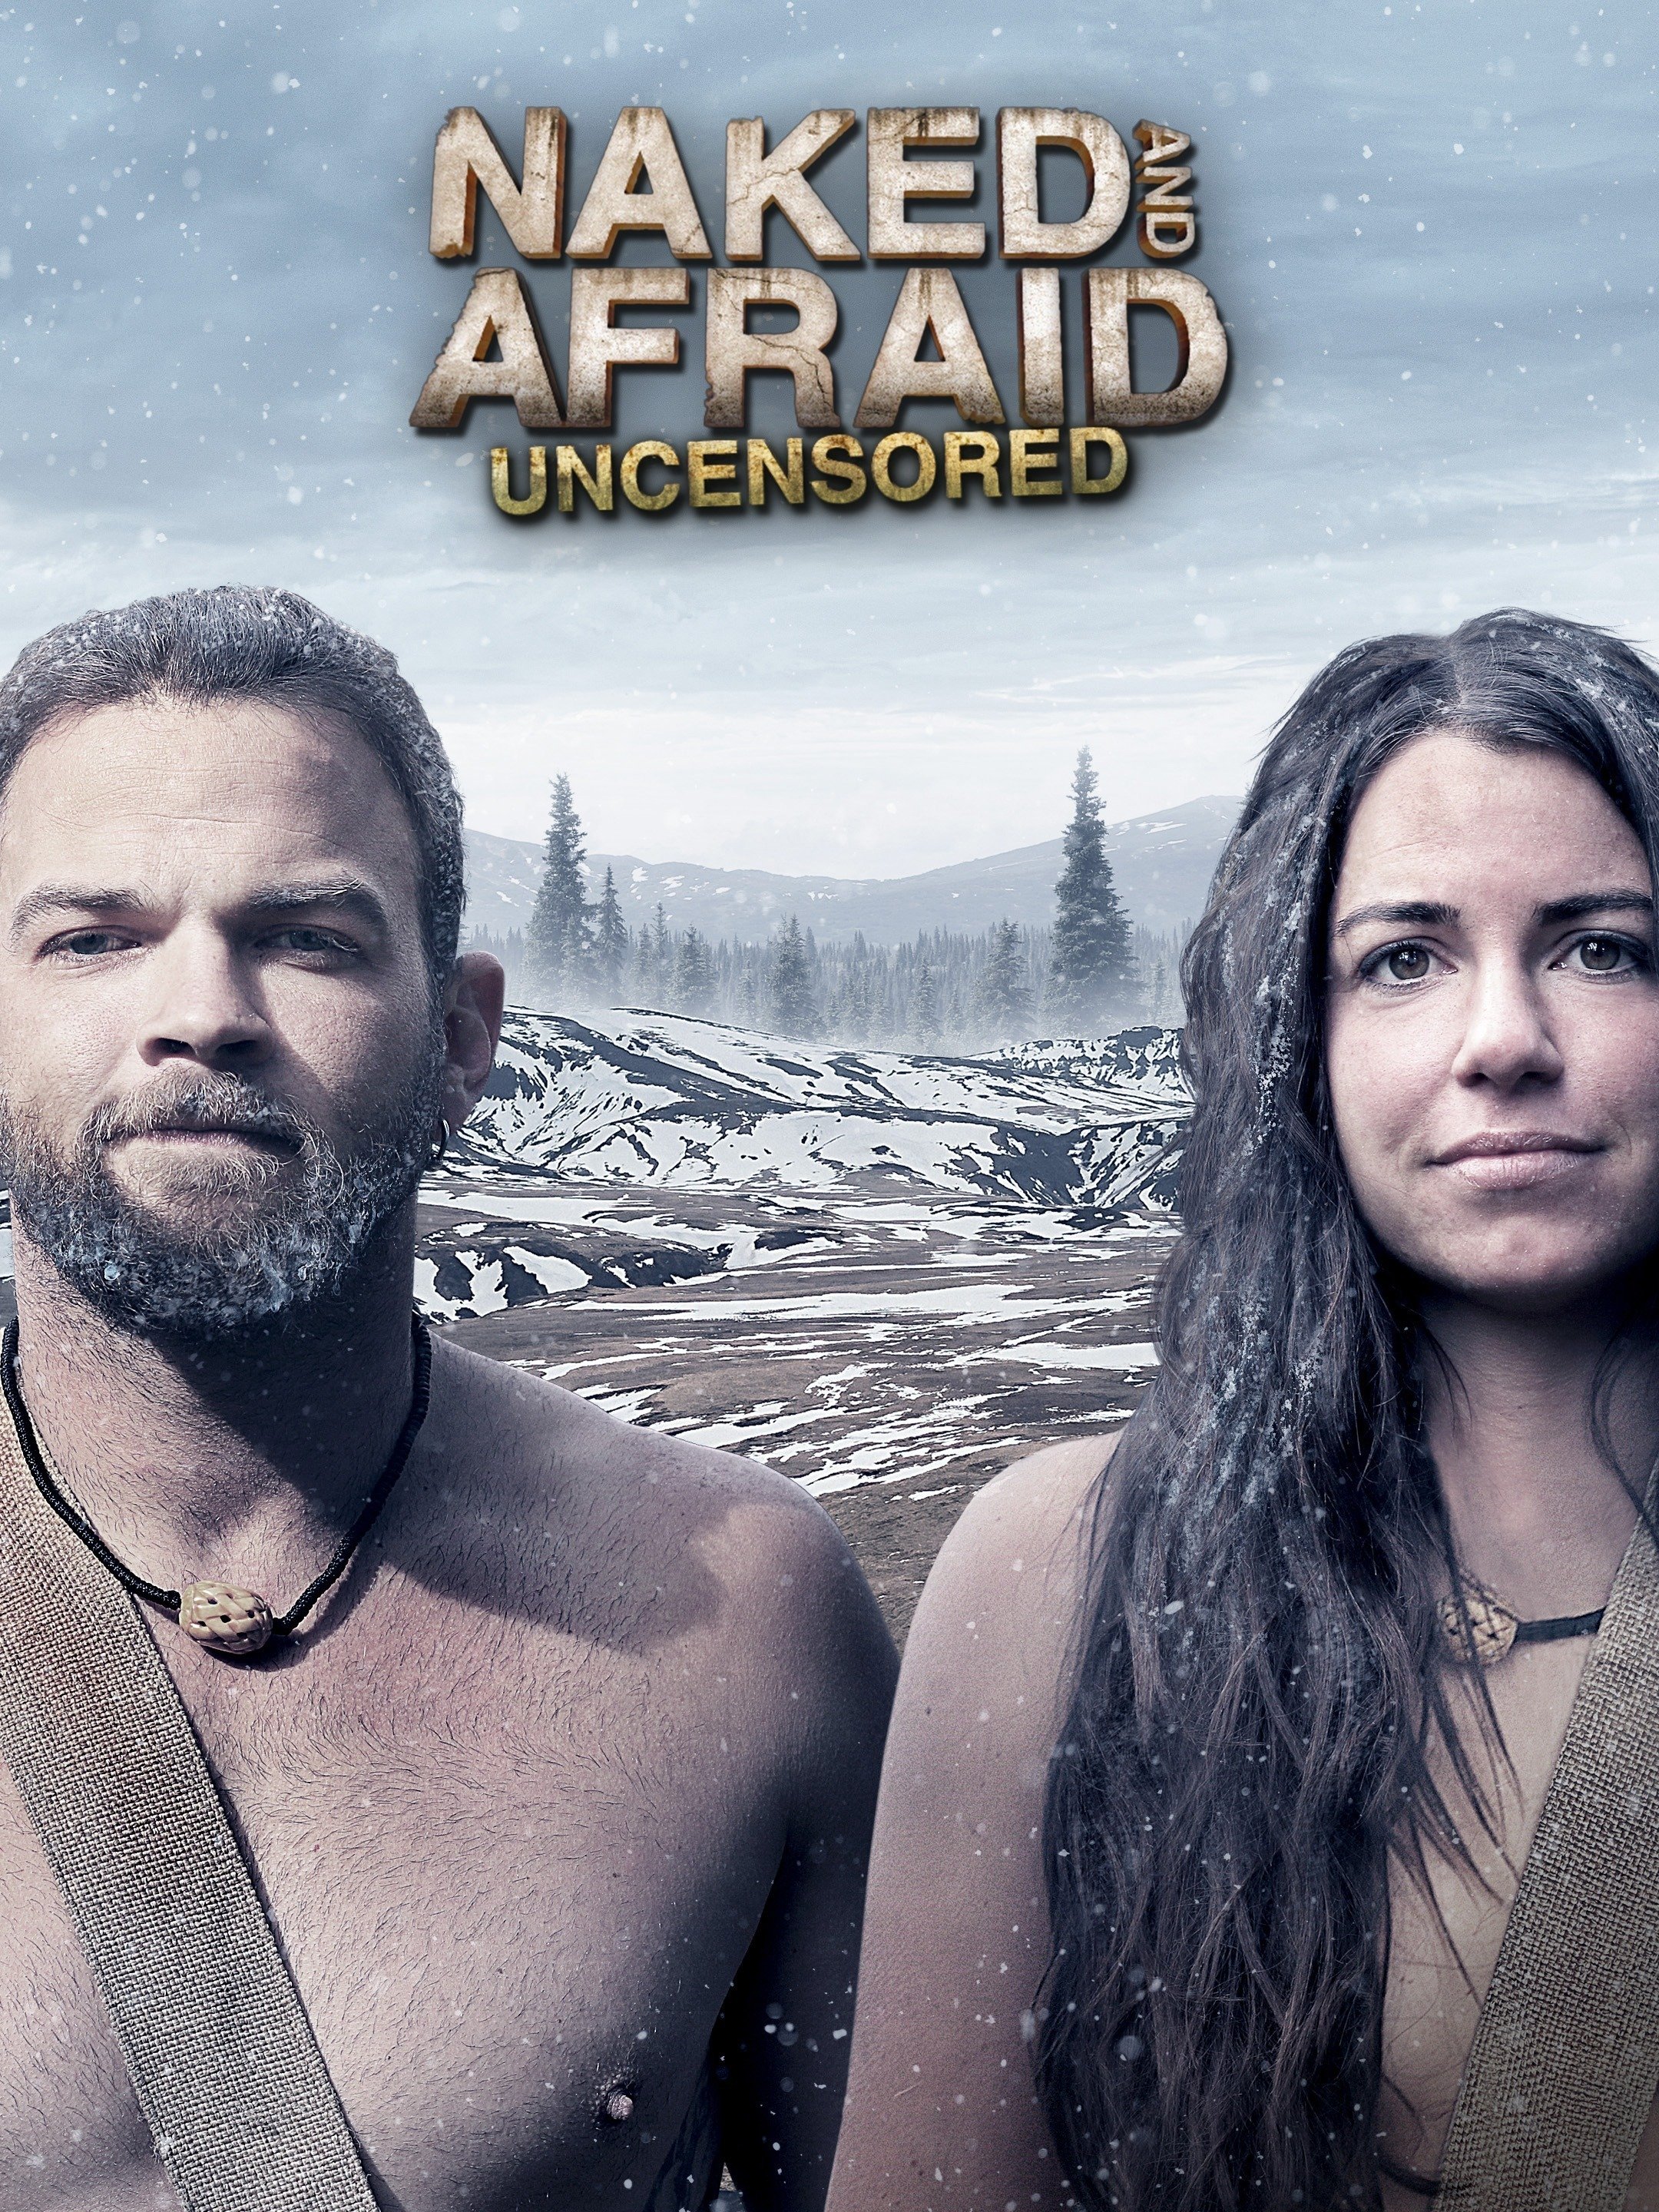 Naked And Afraid Discoverys Nude Travel Survival Show The Daily